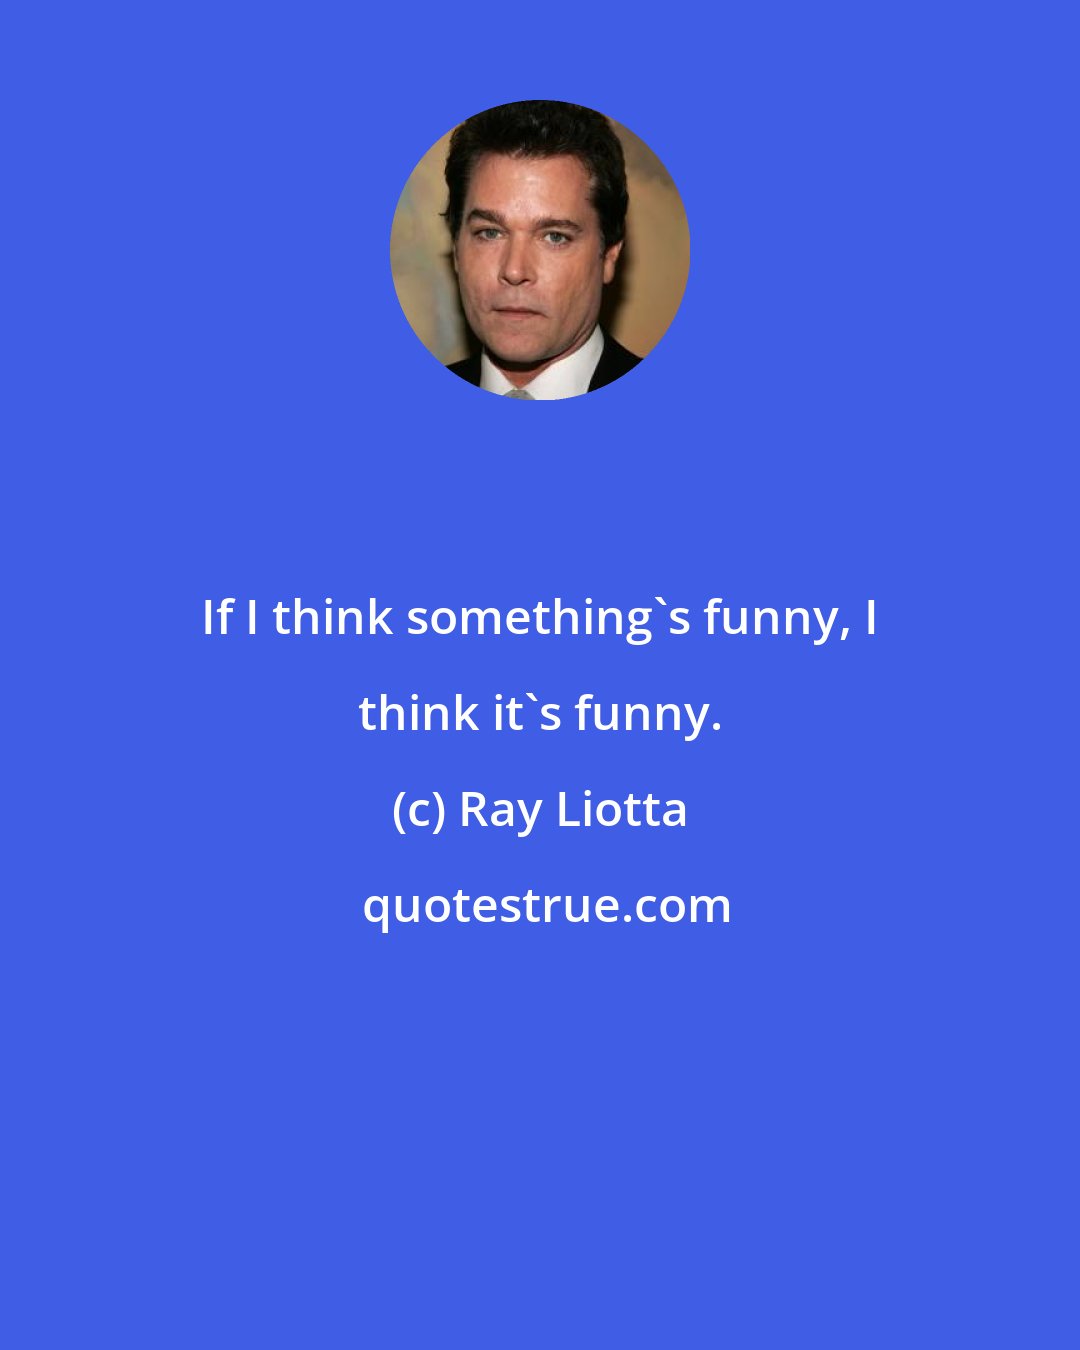 Ray Liotta: If I think something's funny, I think it's funny.